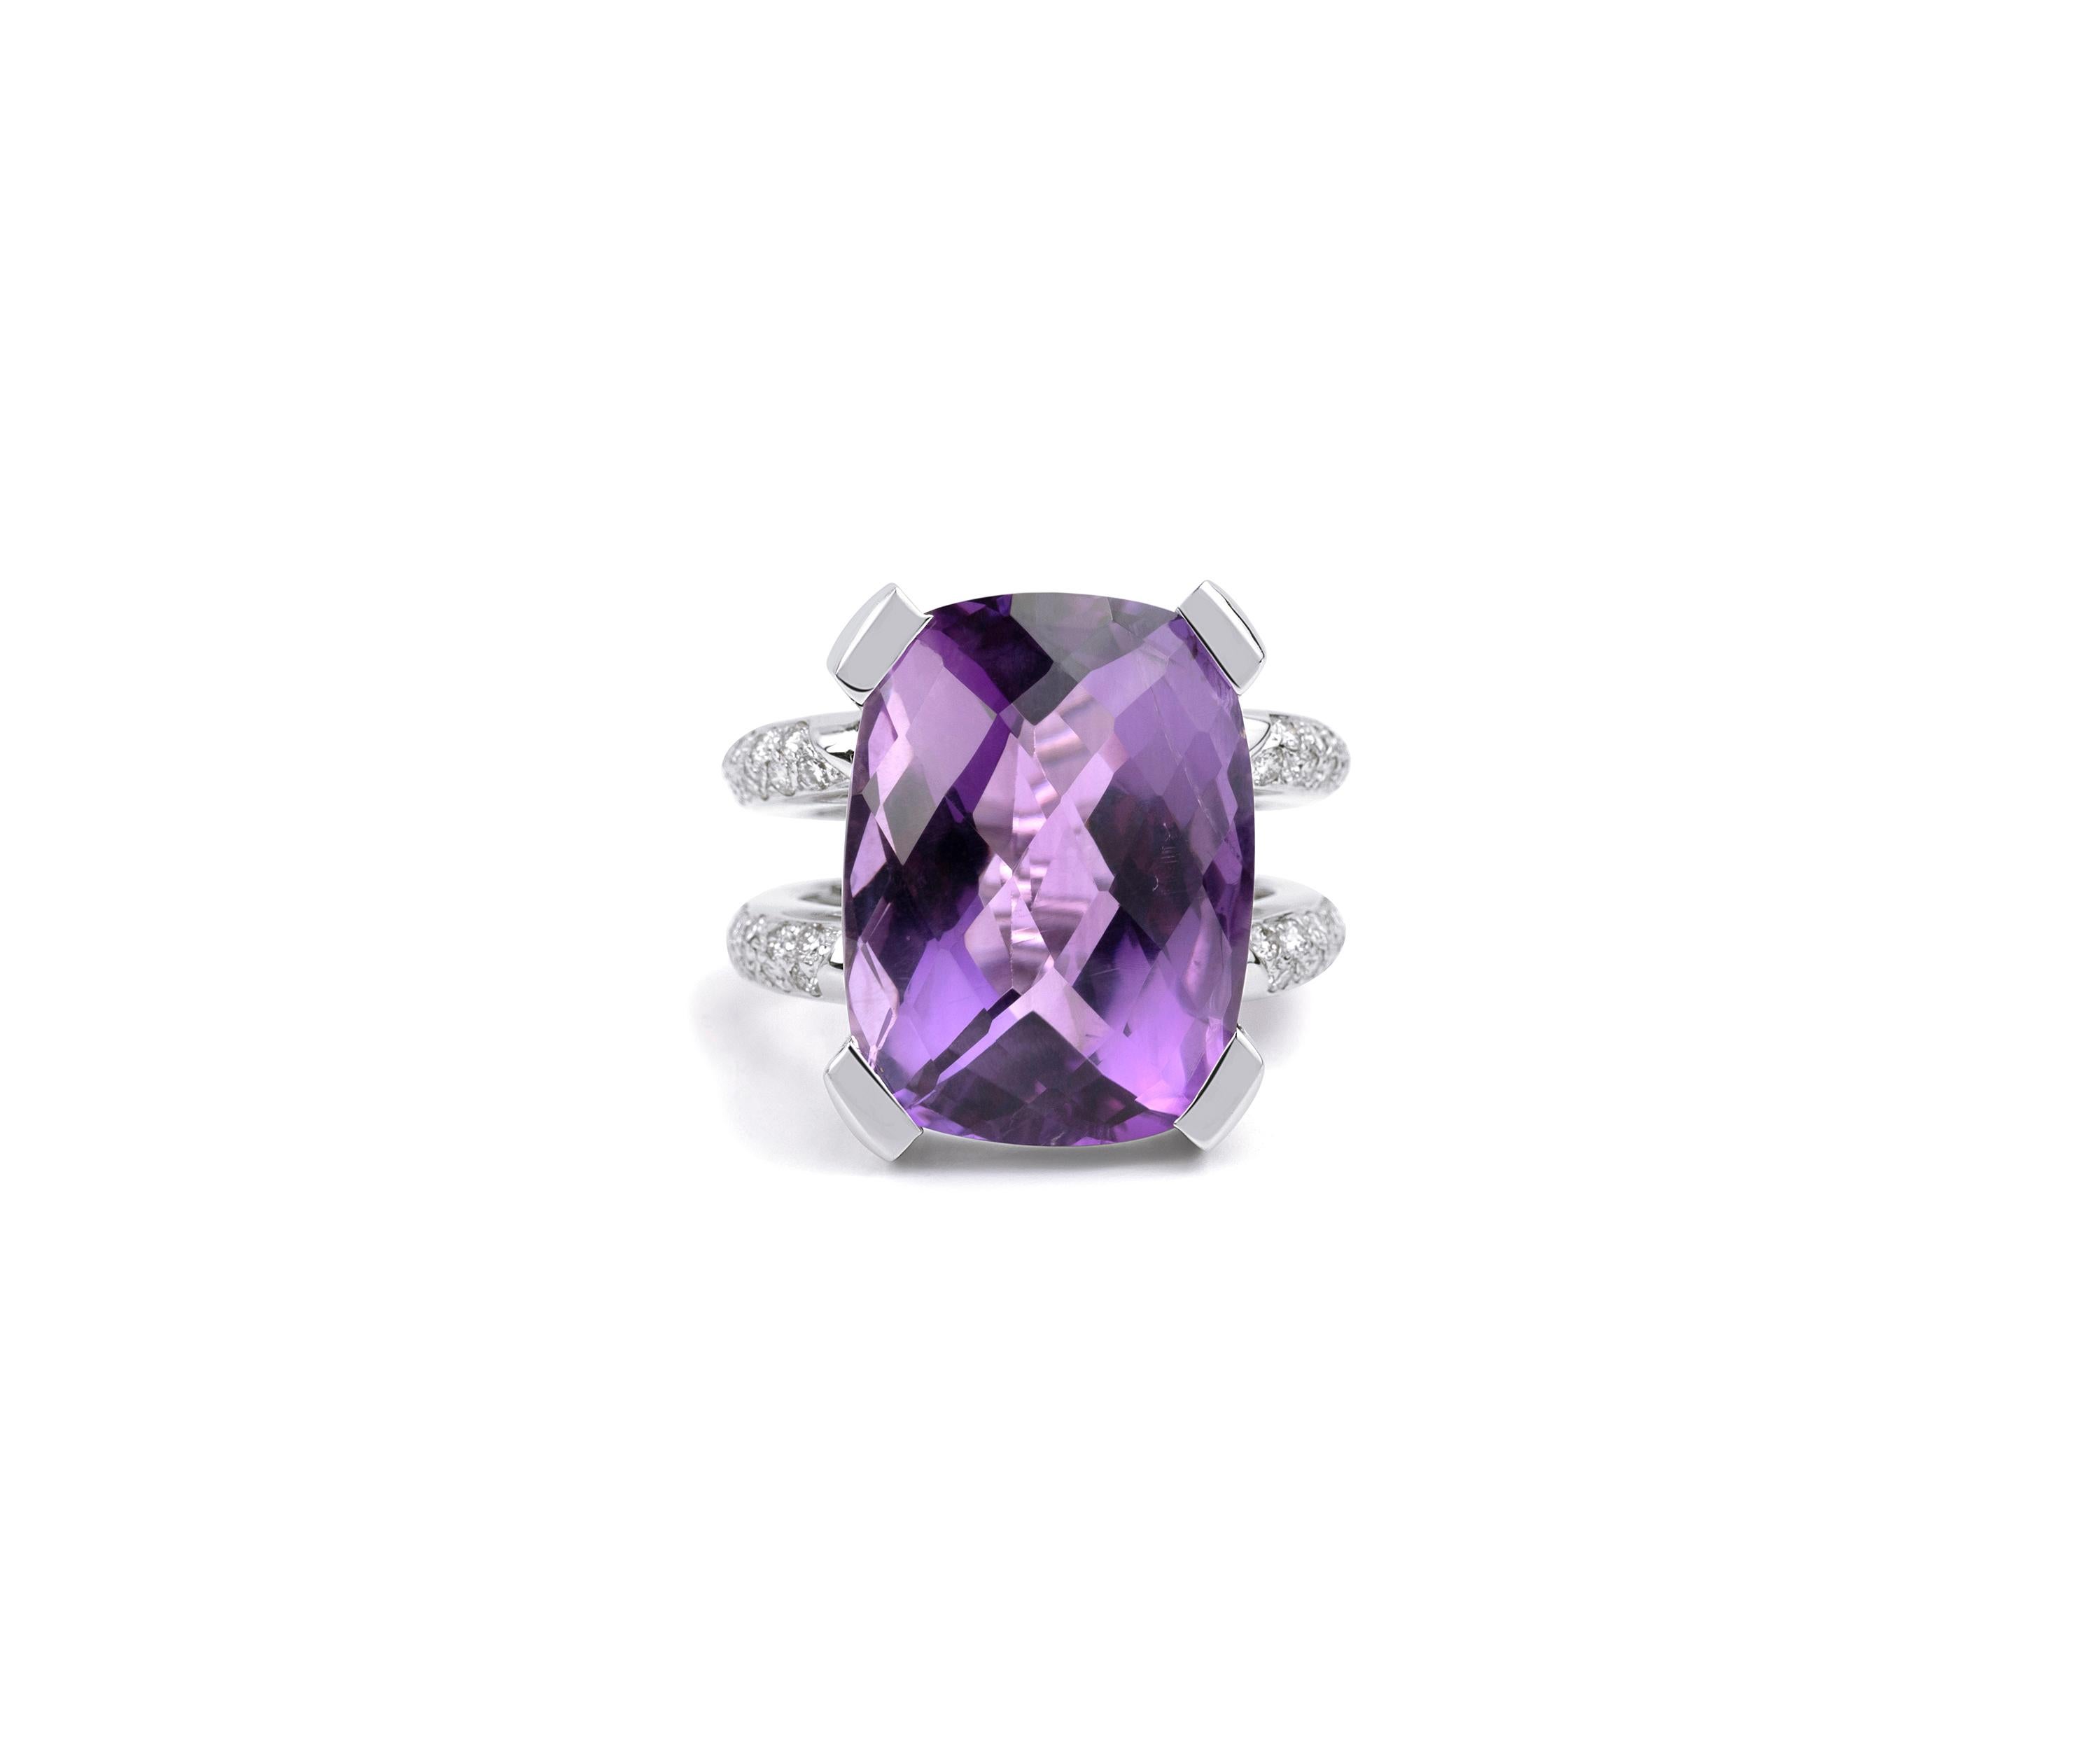 18 carat Cushion Cut Purple Amethyst 1 CT Diamond Cocktail Statement Ring 18k

Available in 18k White gold.

Same design can be made also with other custom gemstones per request.

Product details:

- Solid gold 11.3 grams

- Side diamond - approx.